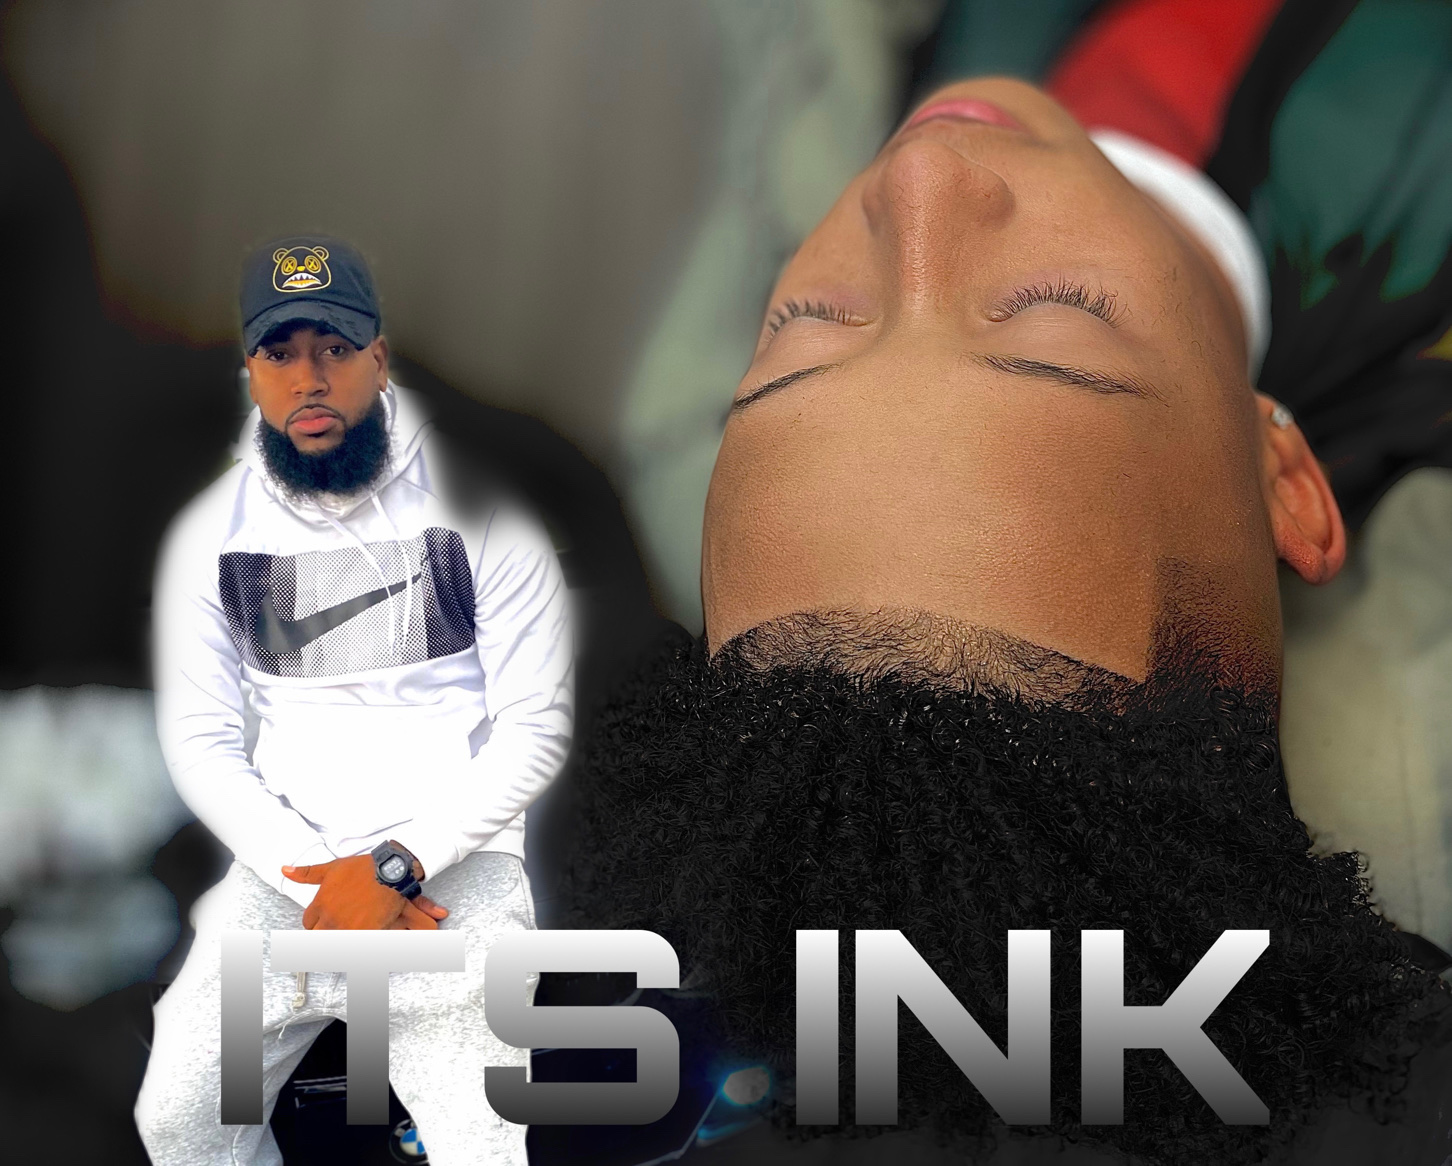 Reviews of It's Ink, LLC - New Bedford MA